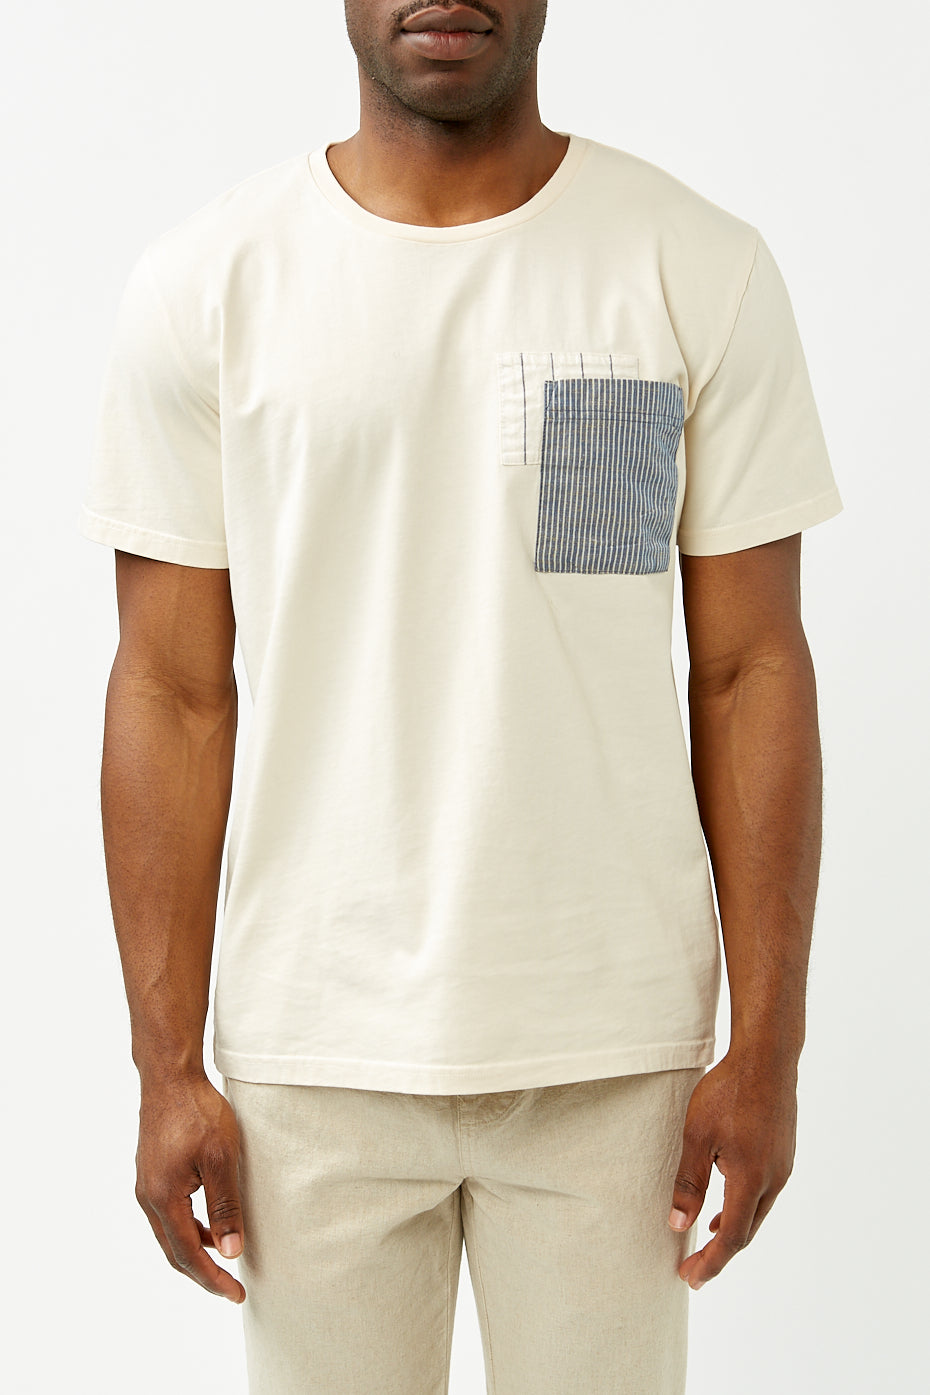 Outland Chambray Pocket Patch T-shirt